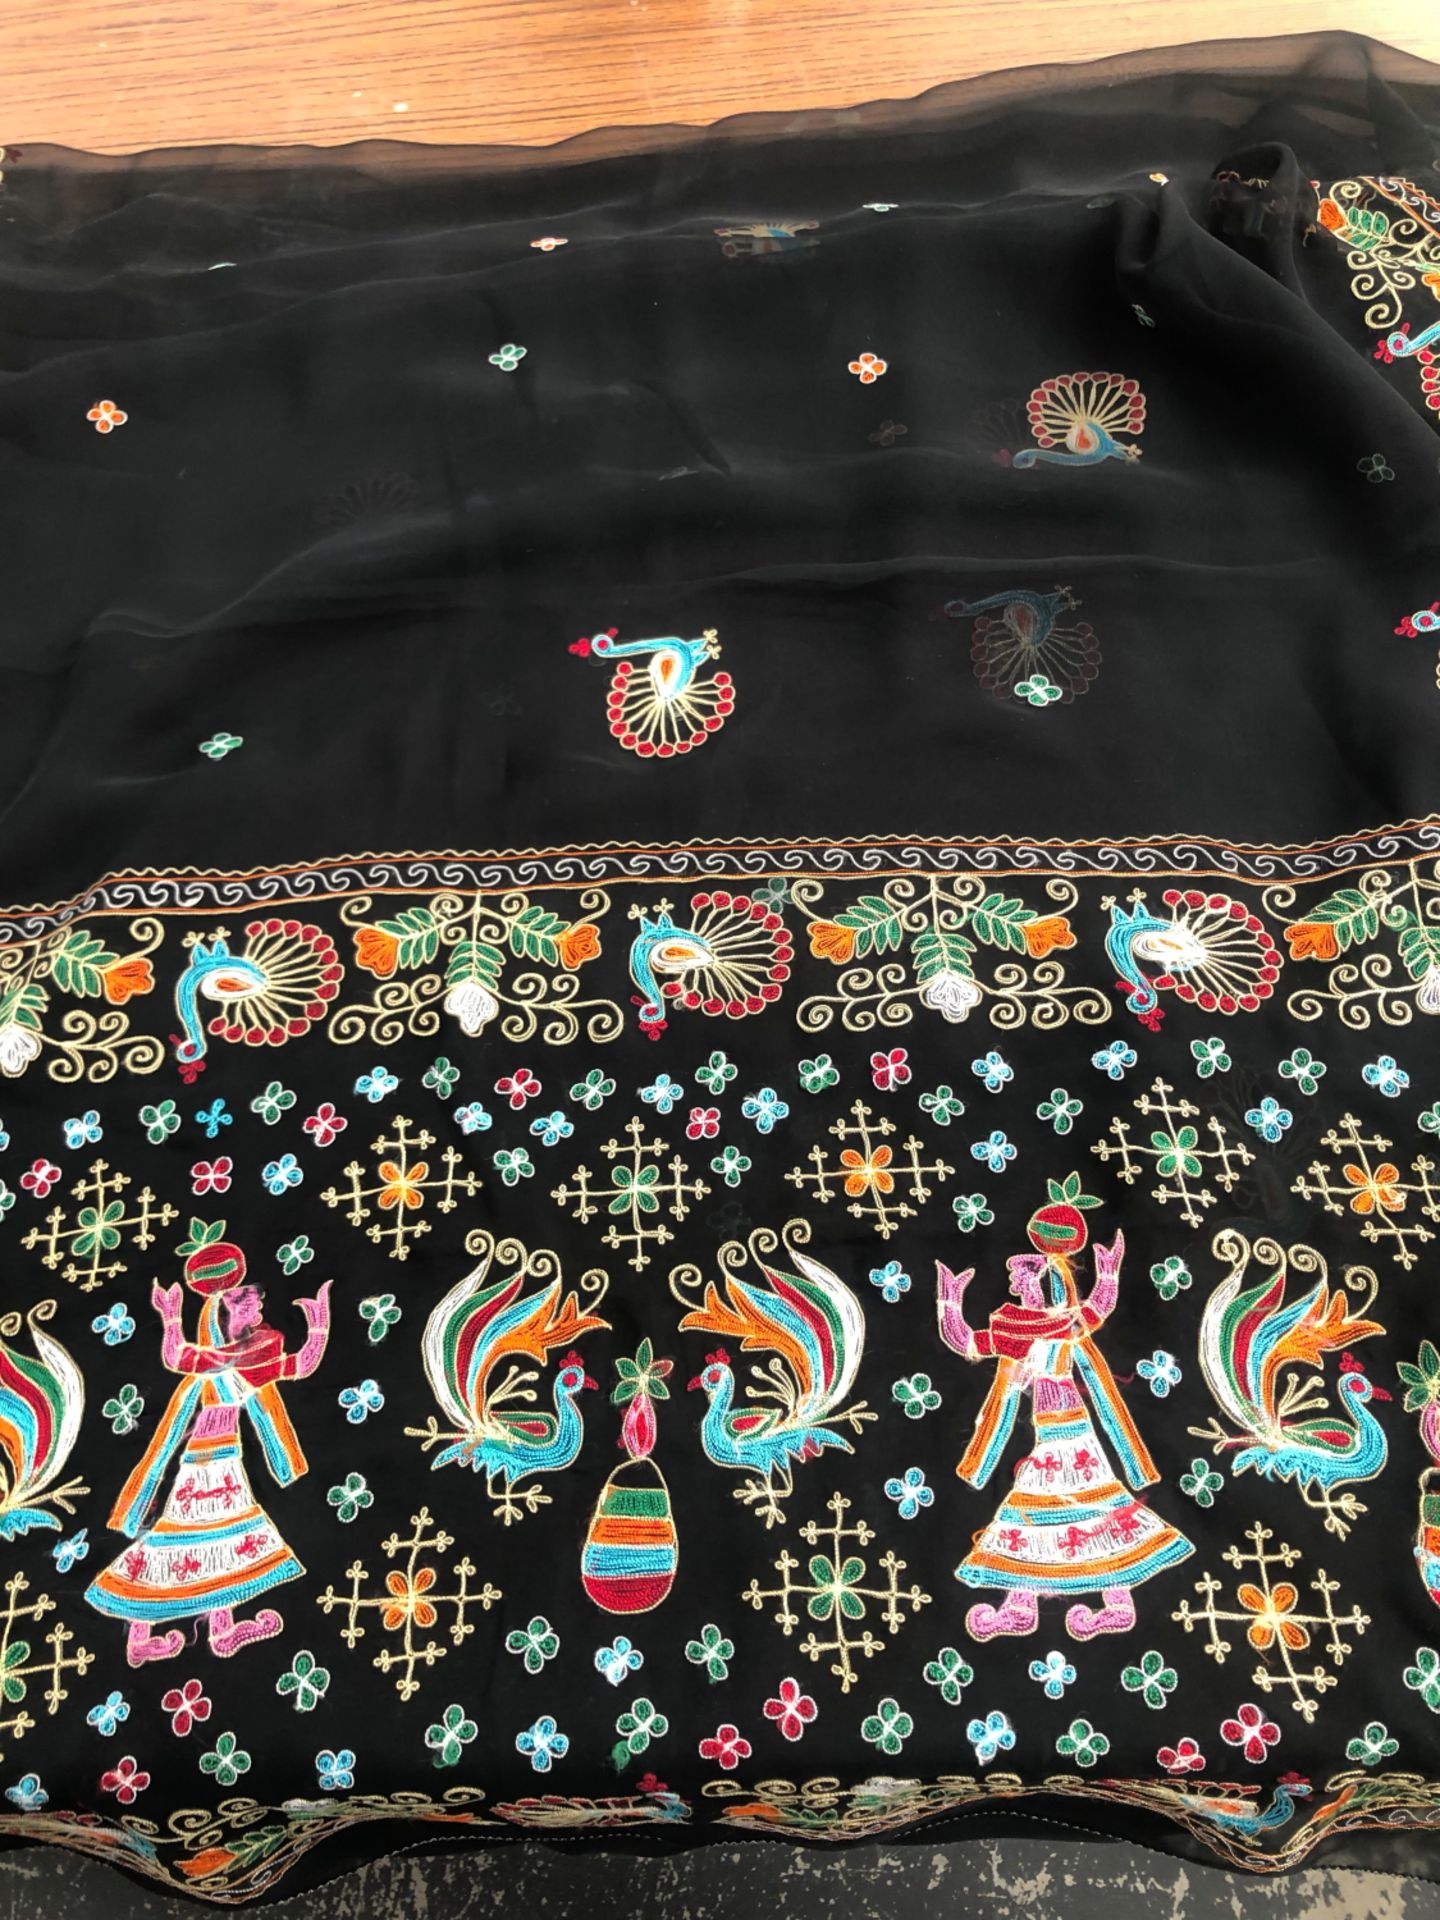 A BLACK CREPE SARI WITH BEAD WORK AND SEQUIN DECORATION, A PINK SARI WITH SILVER THREAD WORK